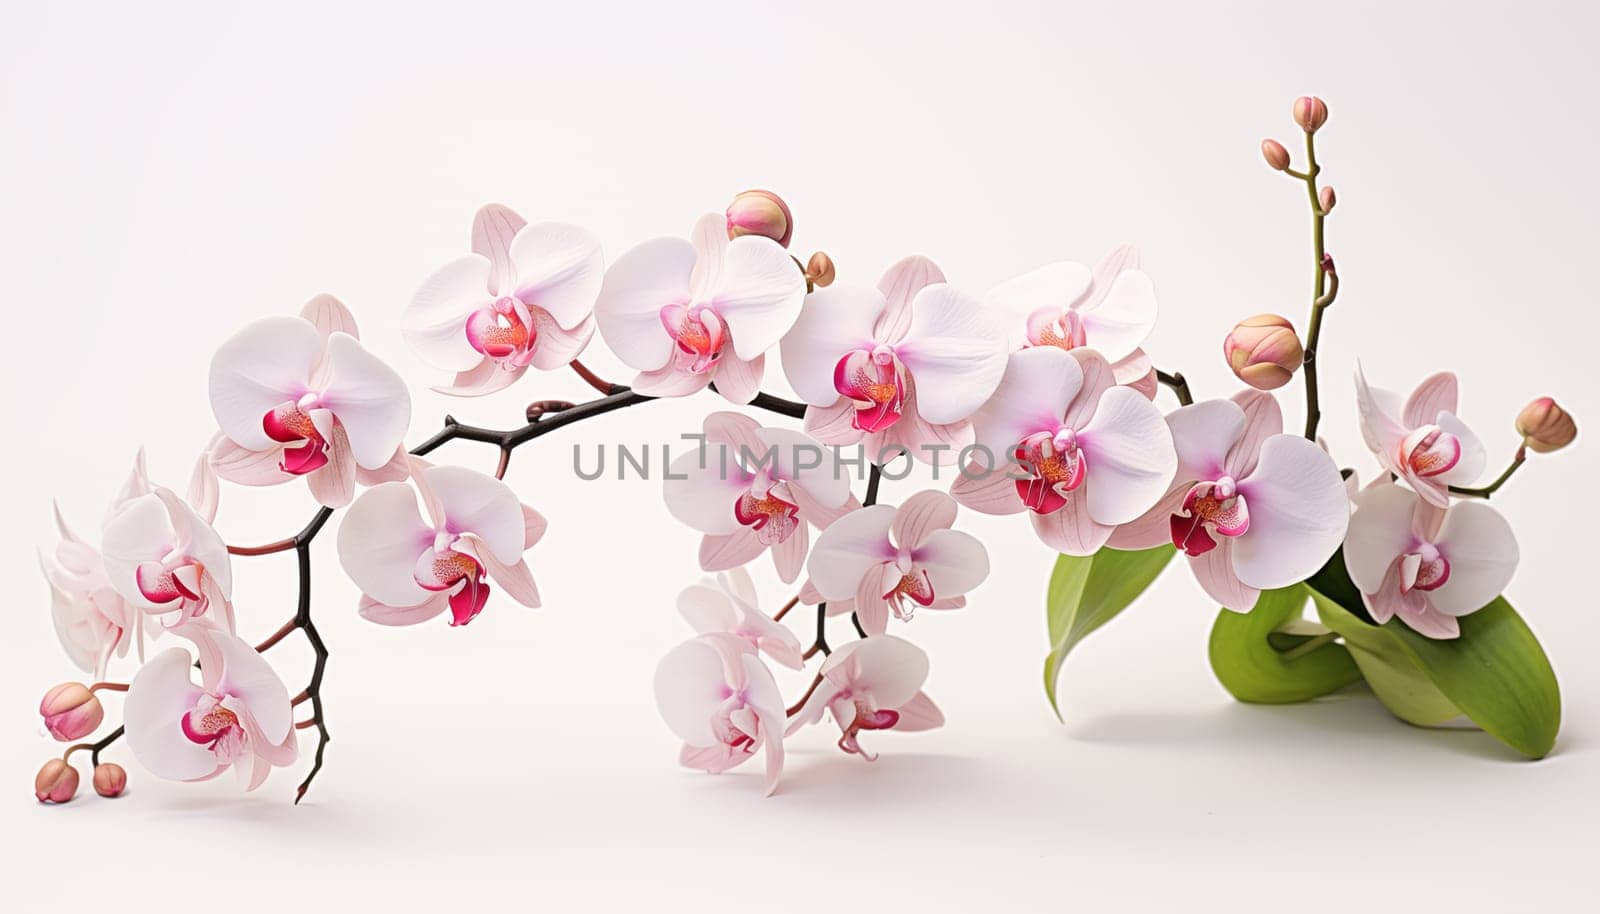 Orchid plant in full bloom by Nadtochiy